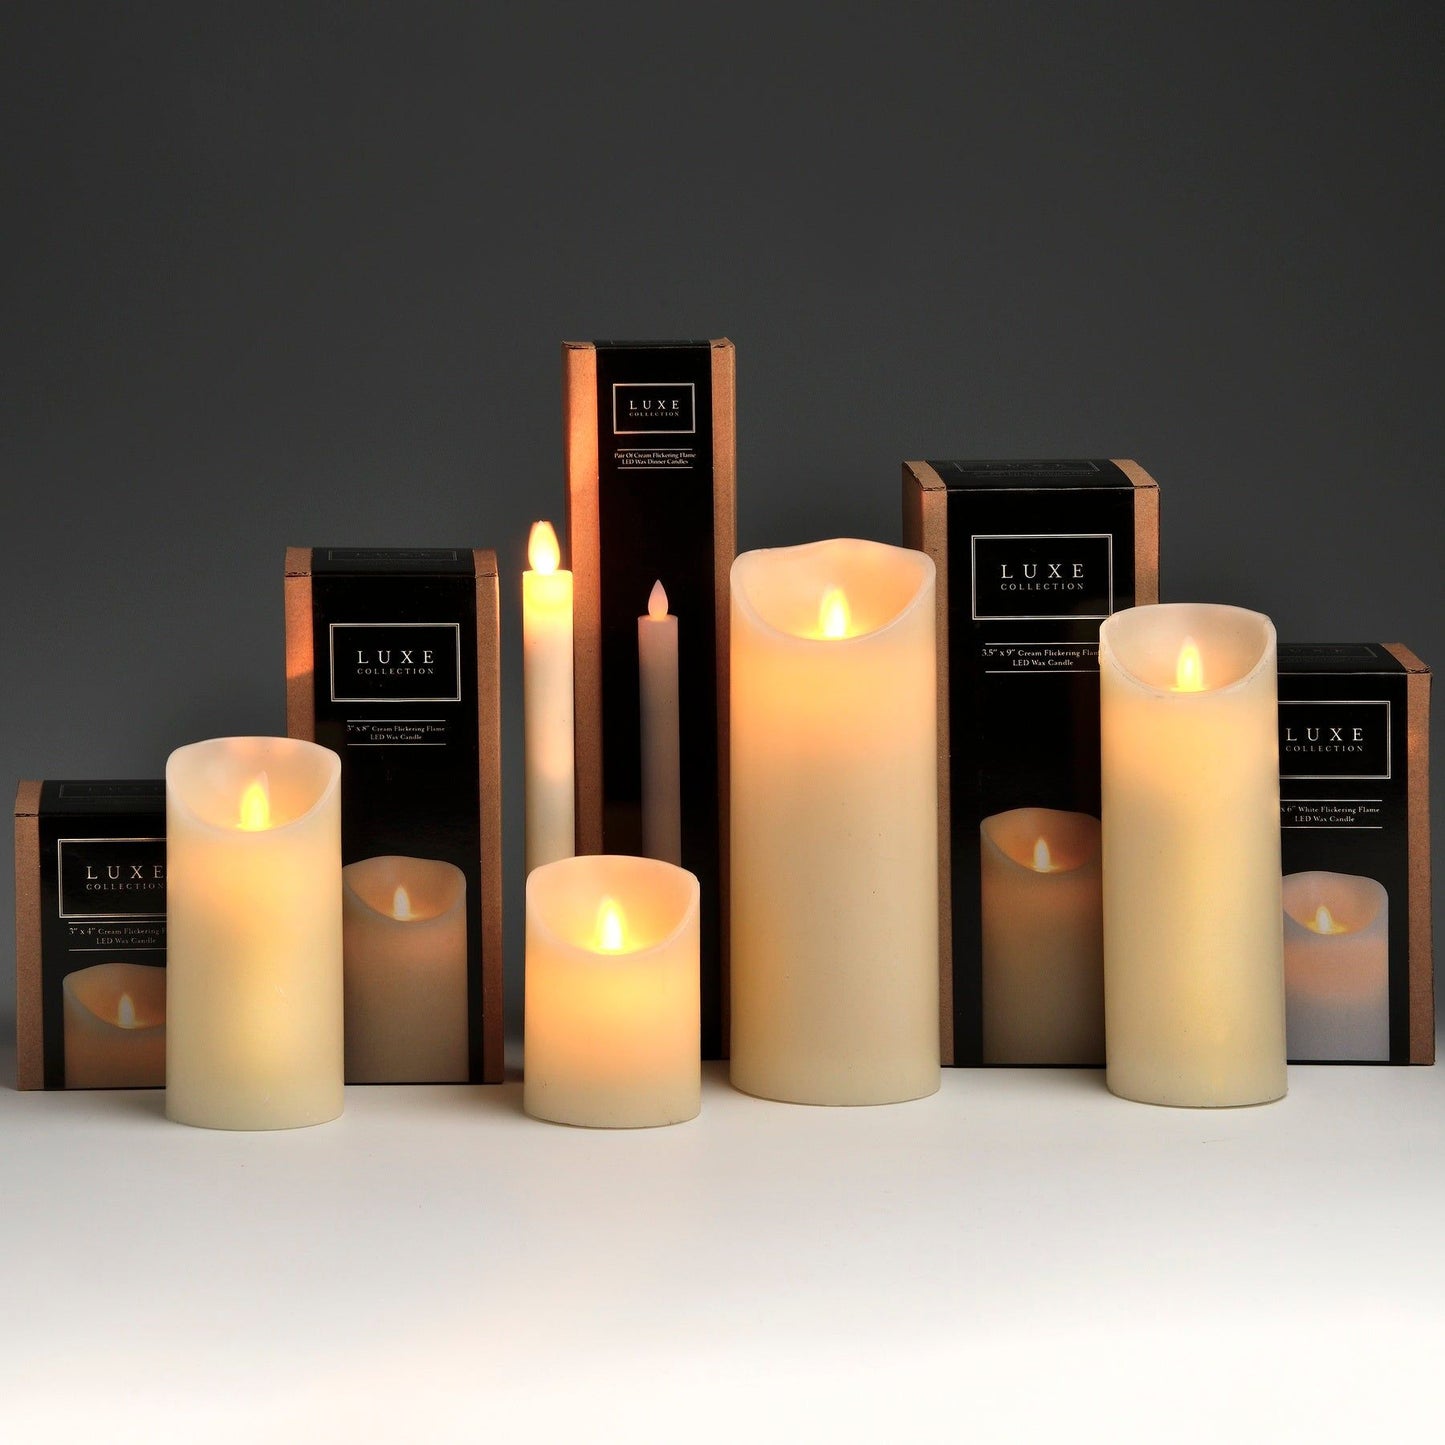 Luxe Collection 3.5 x9 Cream Flickering Flame LED Wax Candle - Ashton and Finch